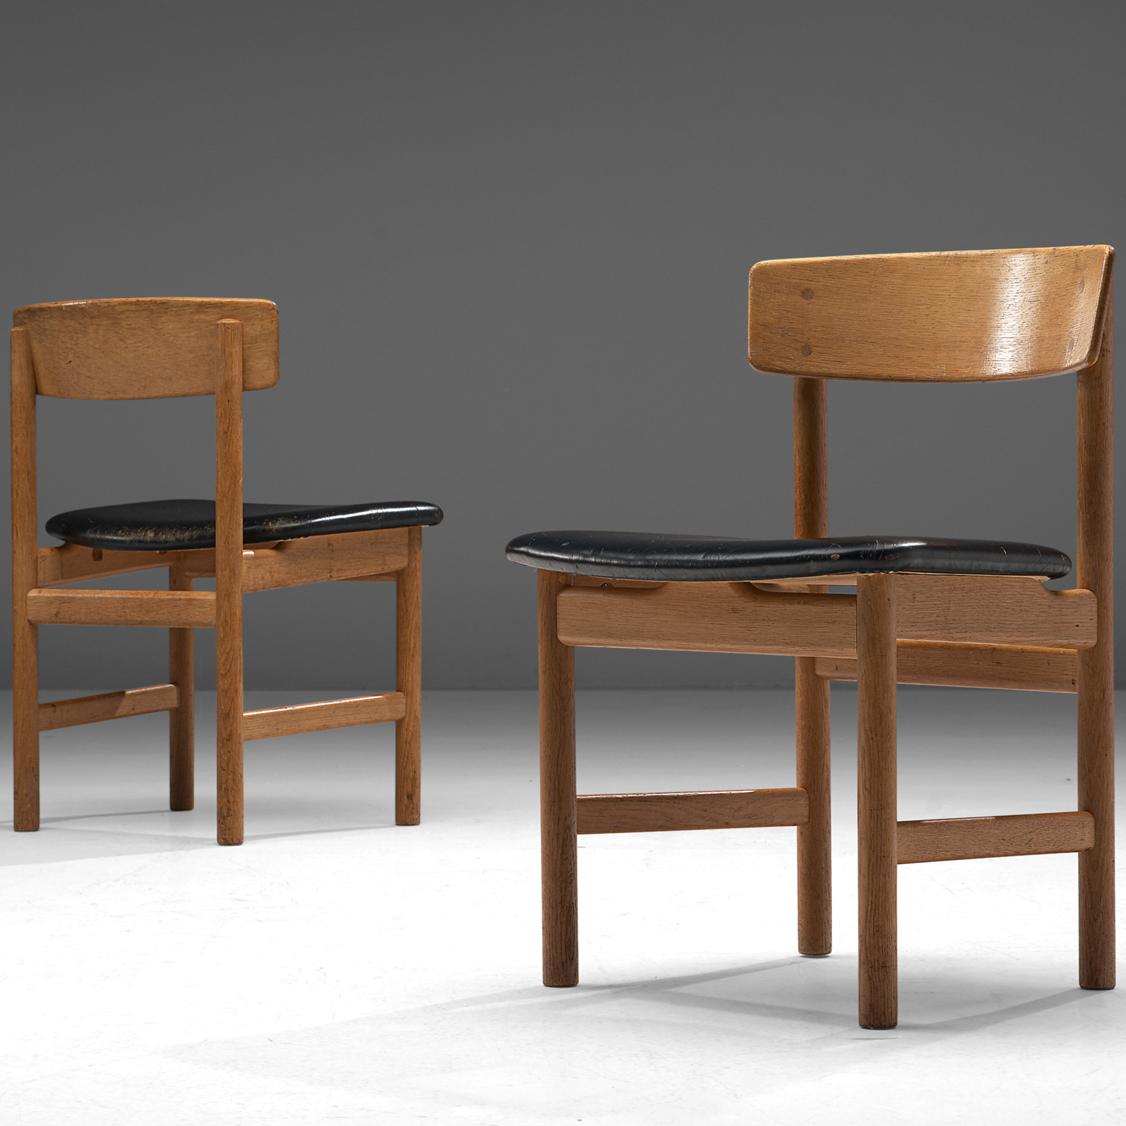 Børge Mogensen for Fredericia Stolefabrik, pair of dining chairs chairs, model 3236, oak, leather, Denmark, 1960s

Pair of dining chairs in oak and black leather upholstery. These chairs show beautiful lines in their modest appearance. The back